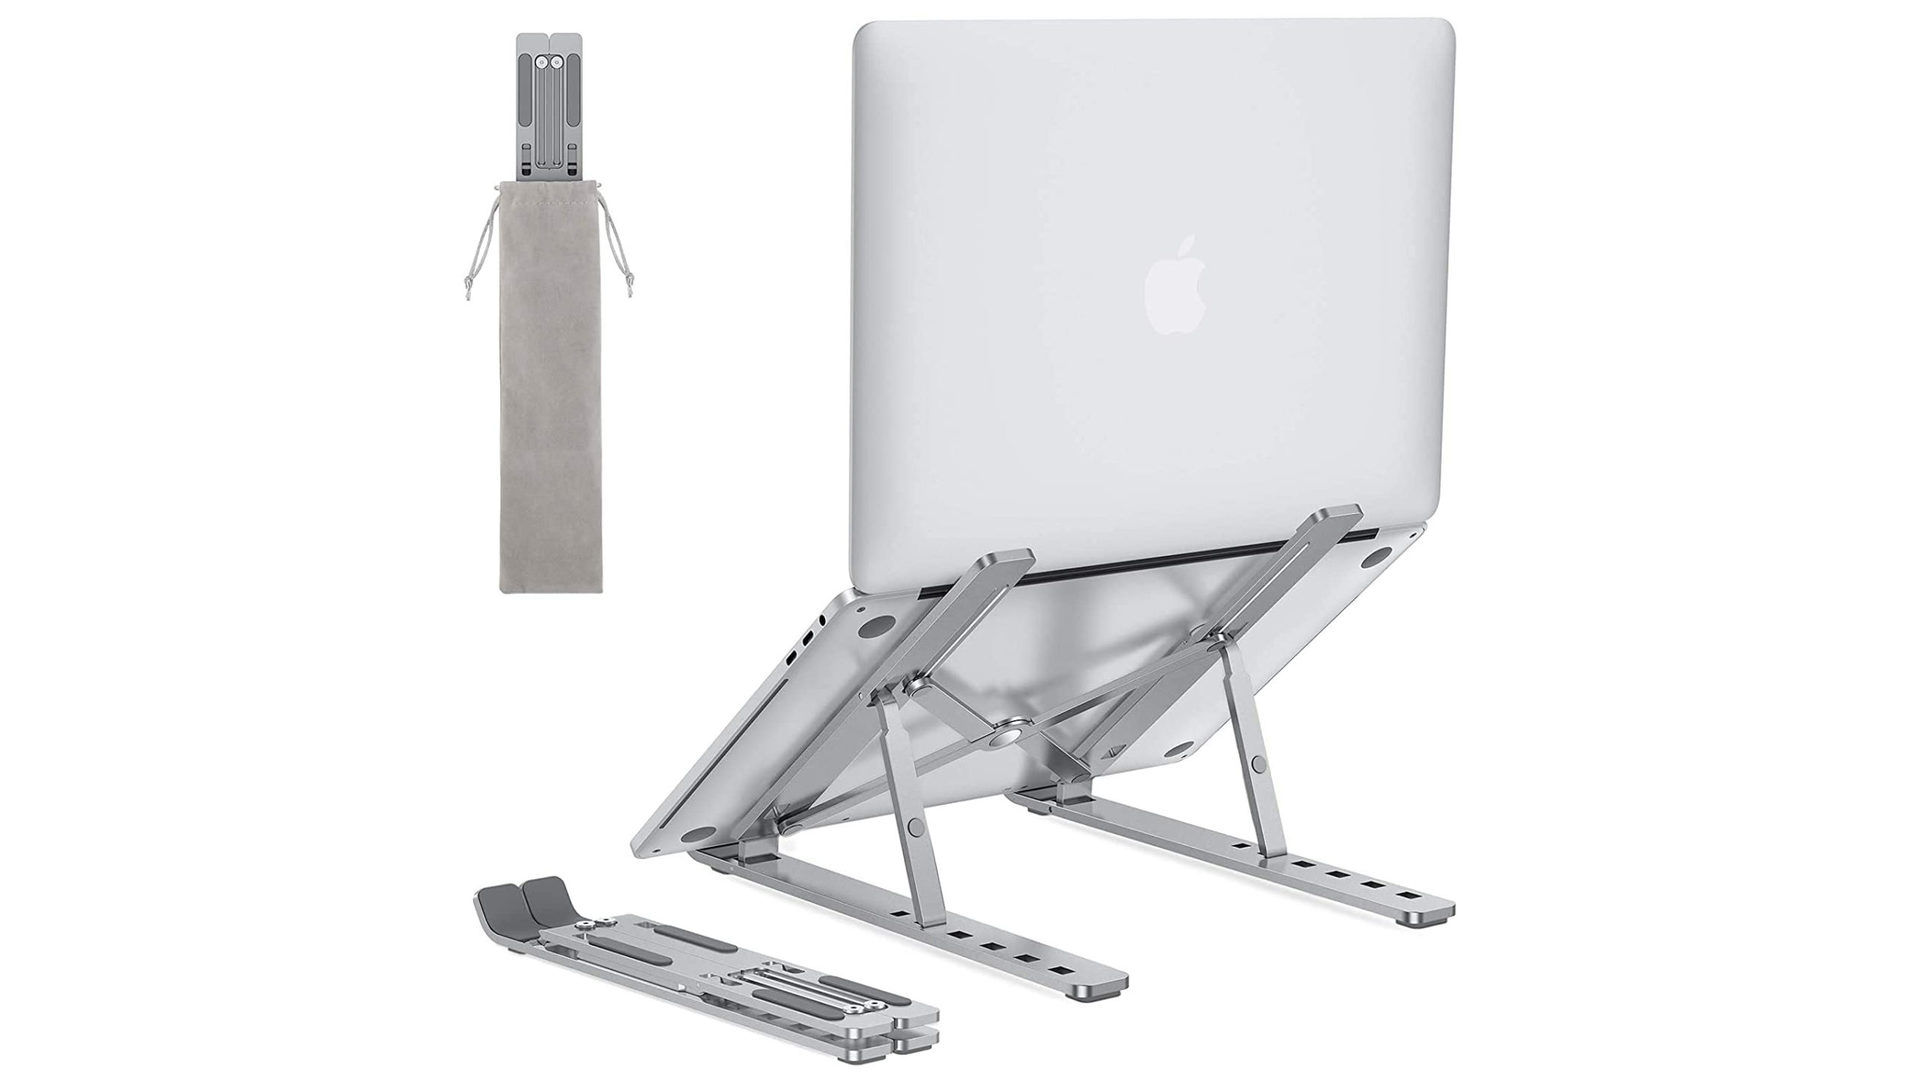 Omoton portable laptop stand - The best travel gadgets